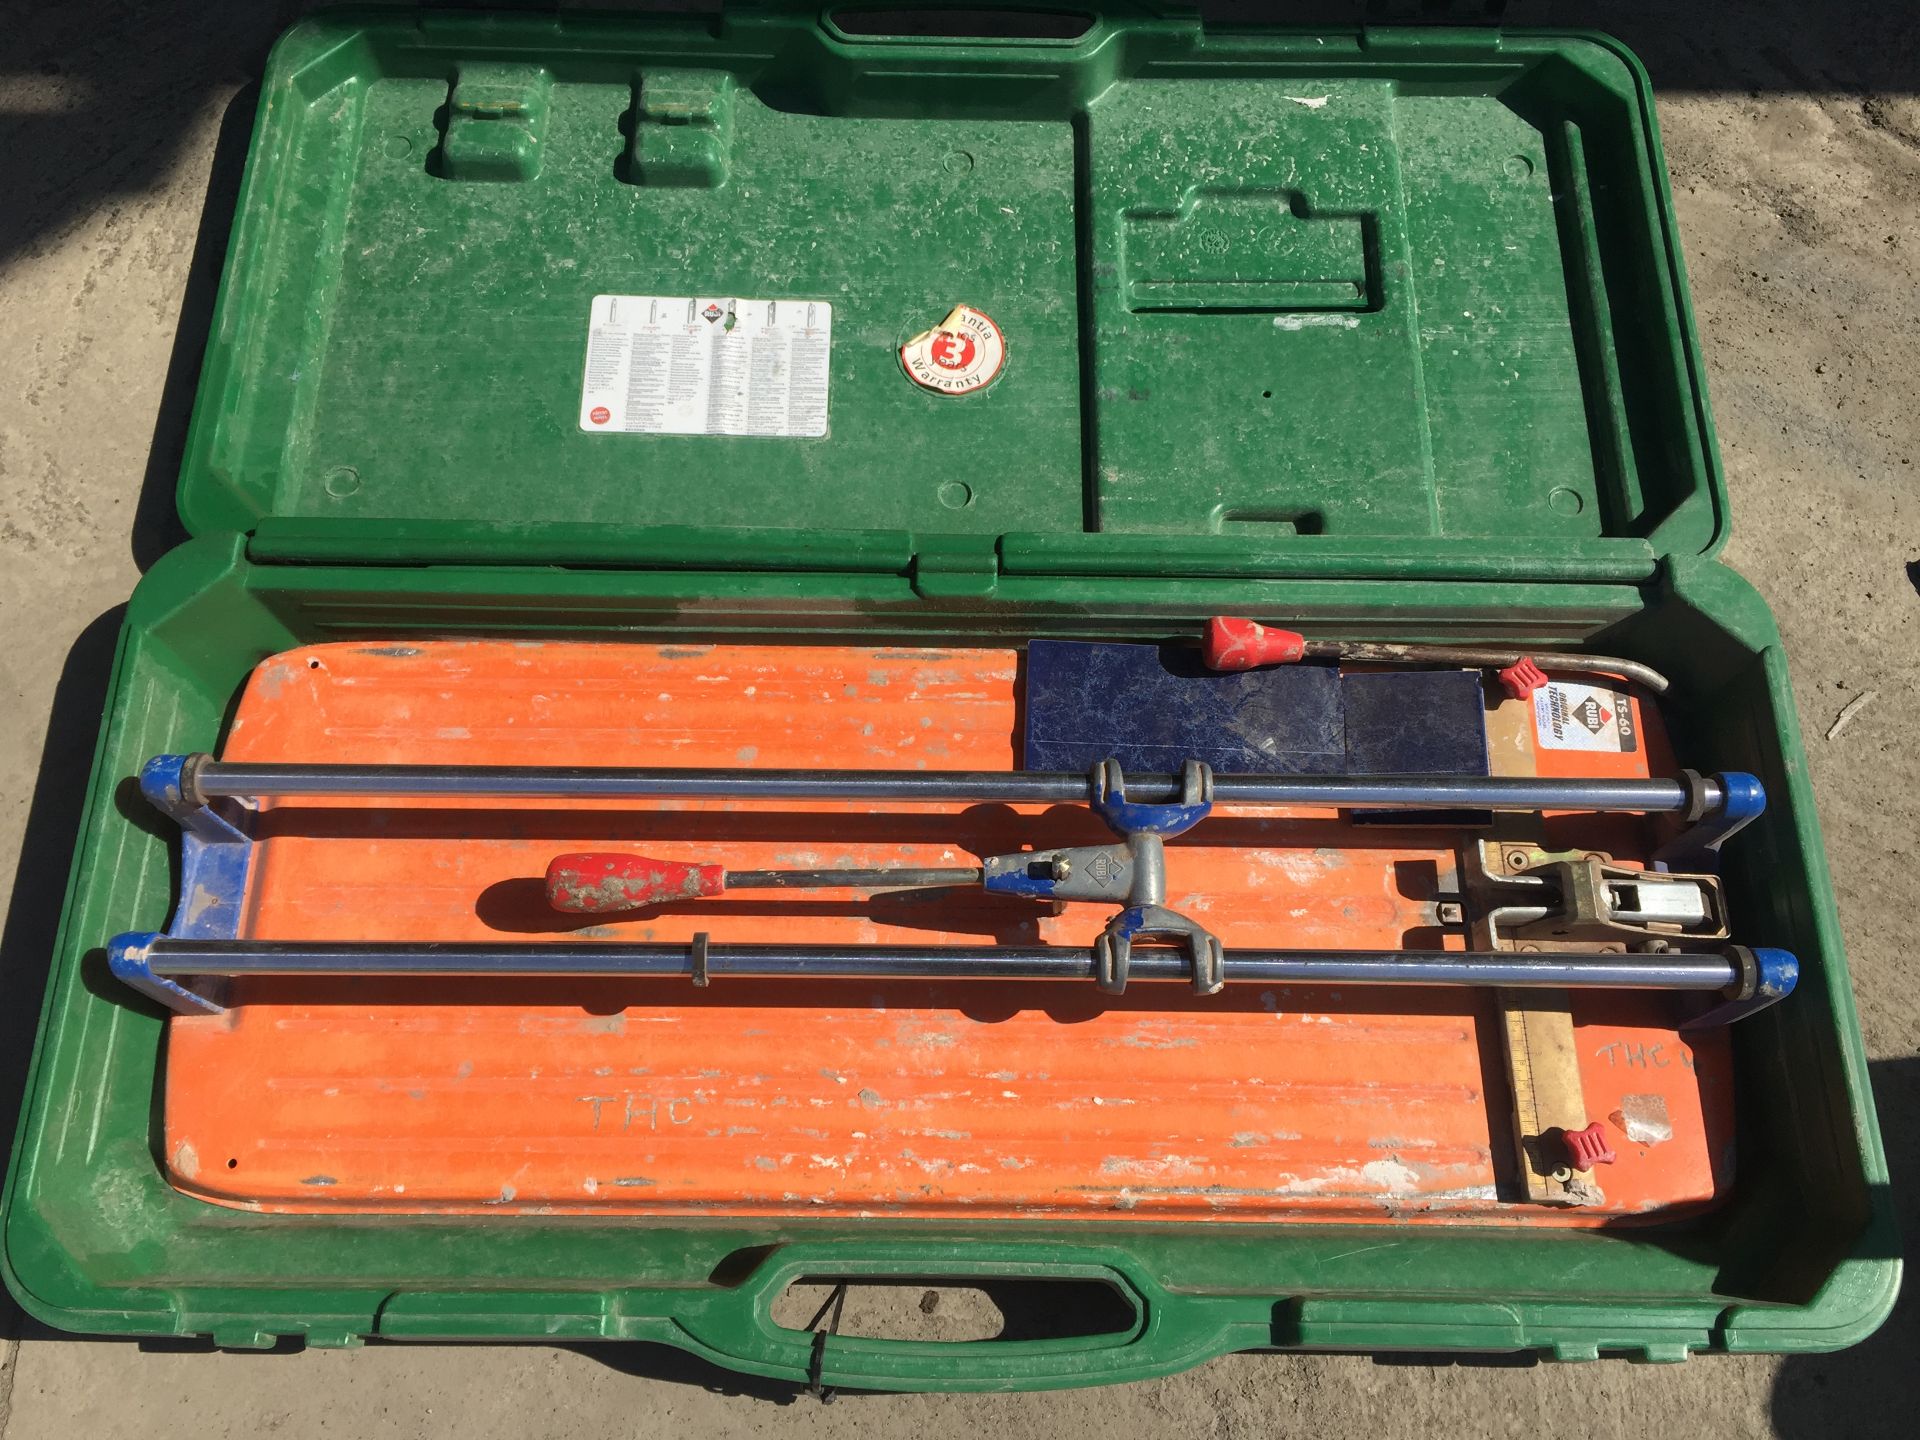 PL-14513 UNRESERVED Rubi TS-60 Manual Tile Cutter In Case